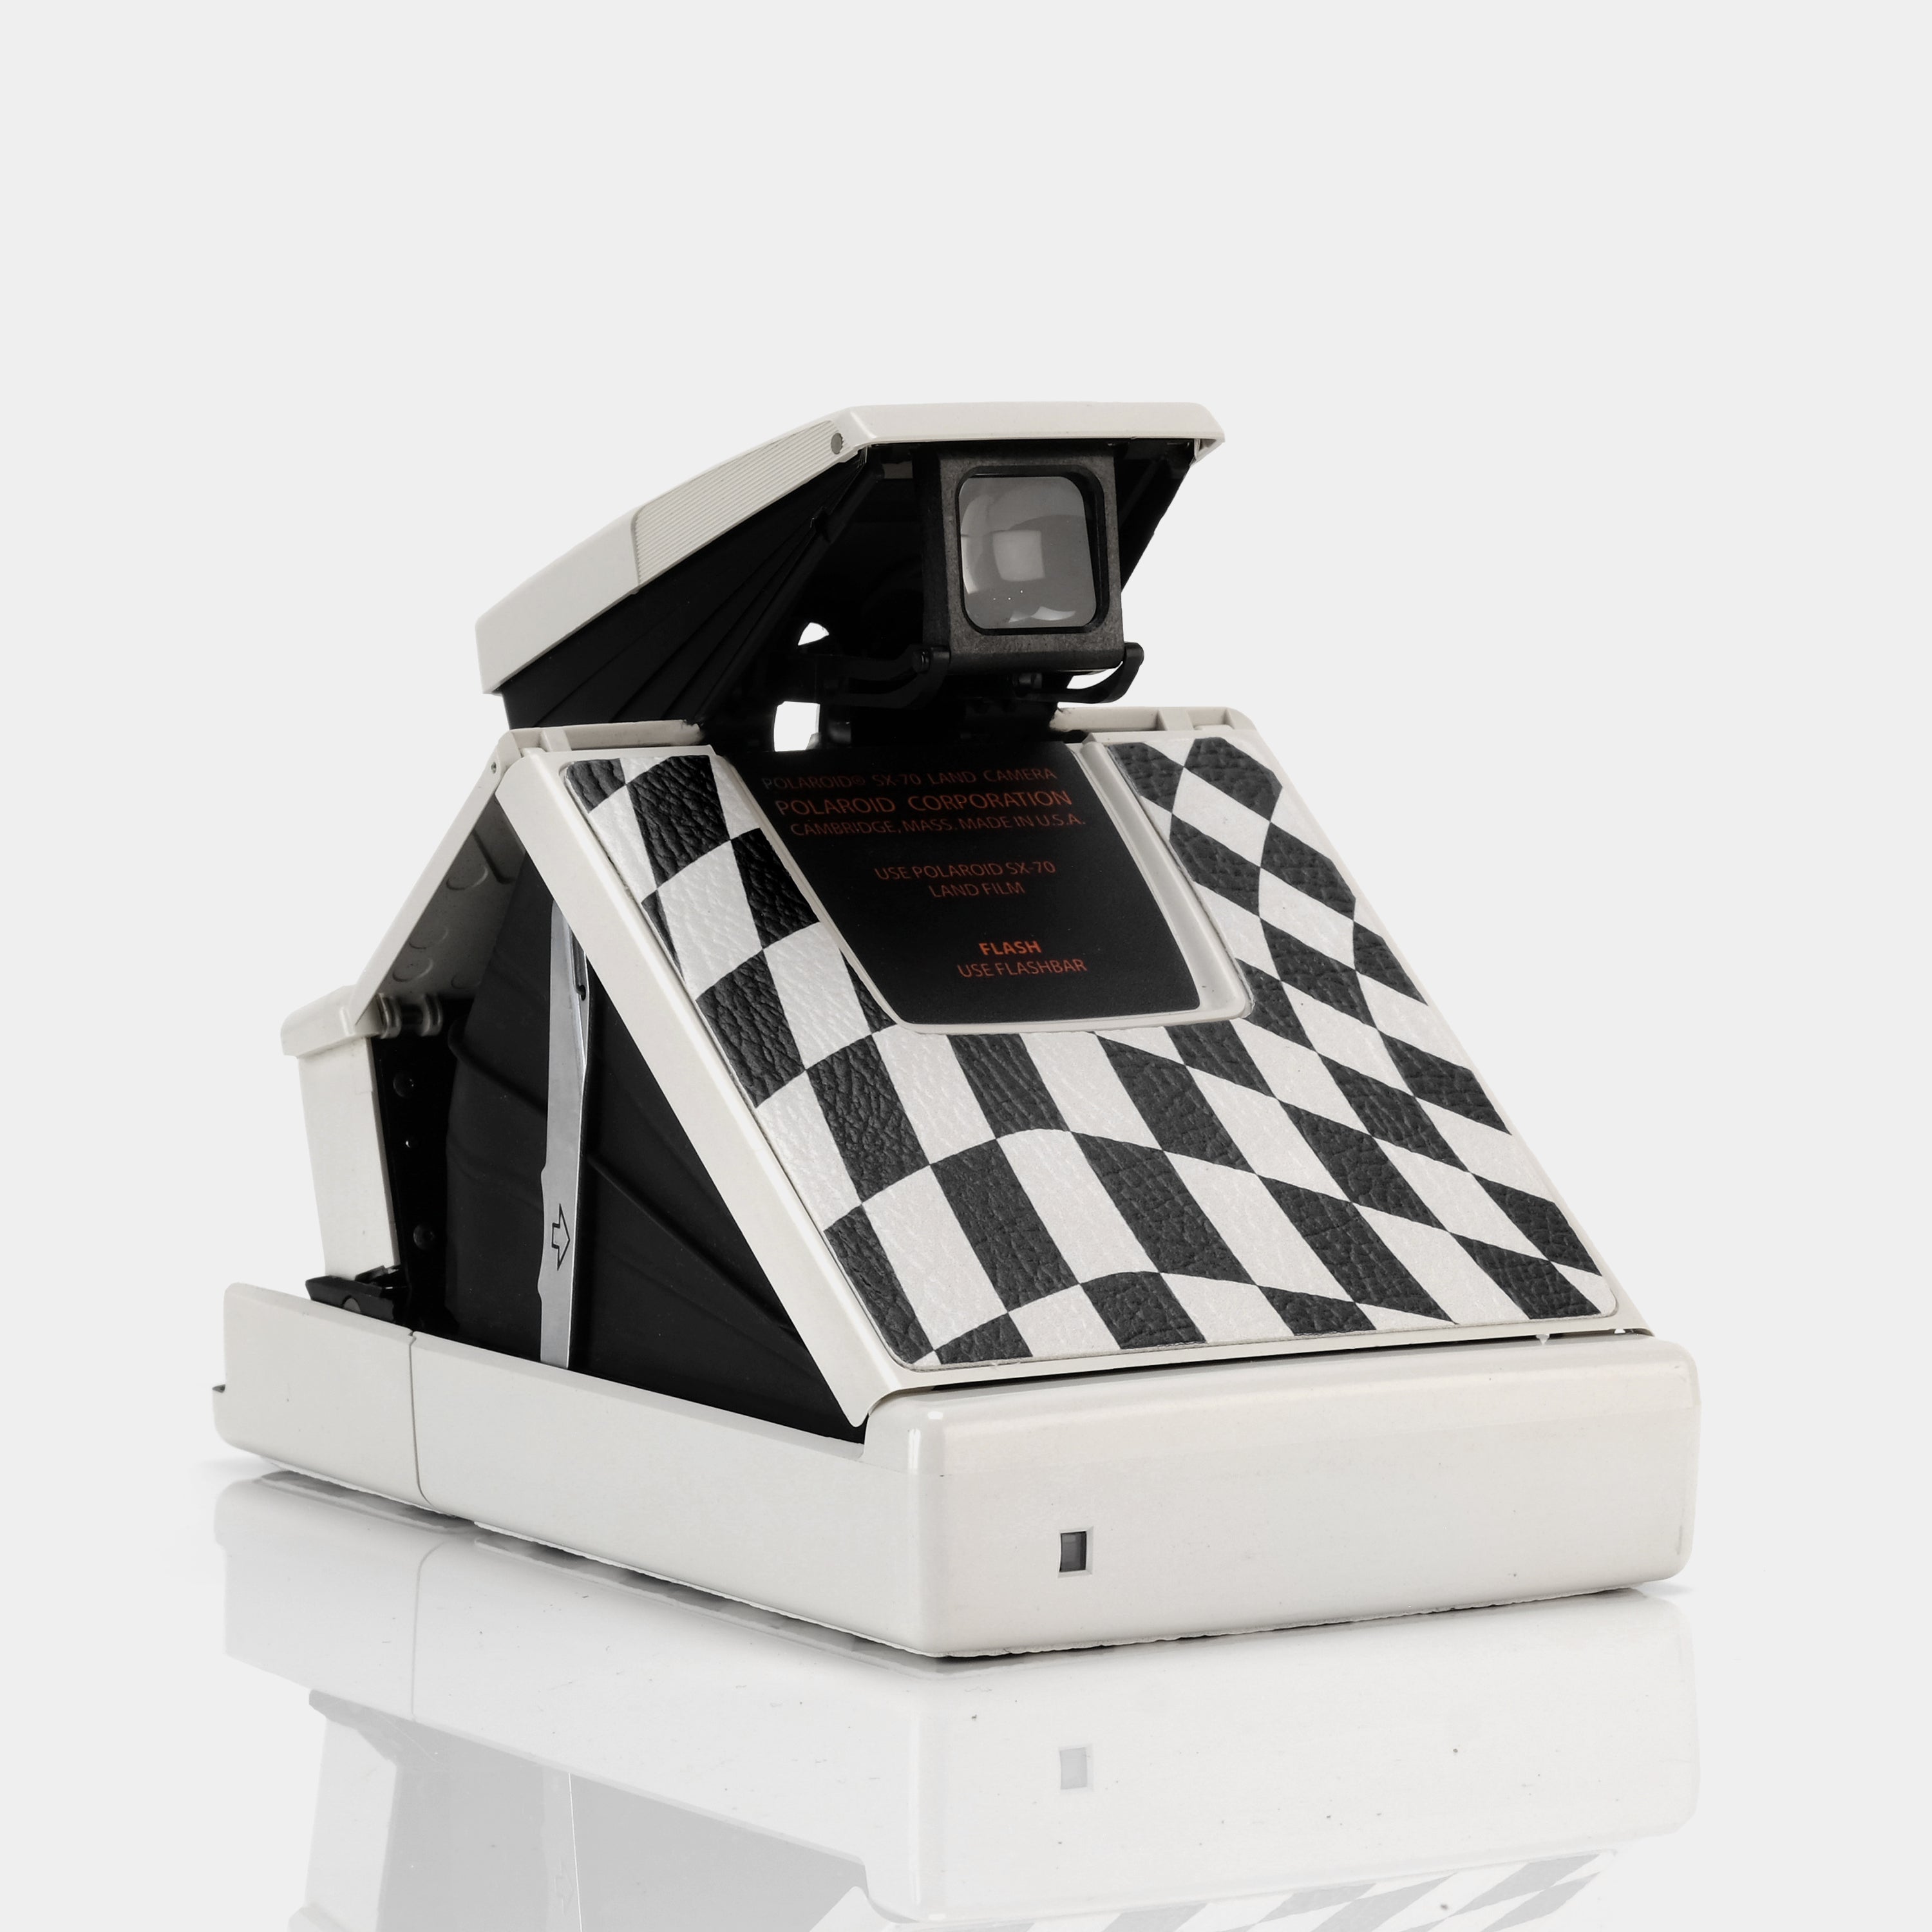 Polaroid SX-70 Model 2 White with Black and Ivory Wave Check Folding Instant Film Camera